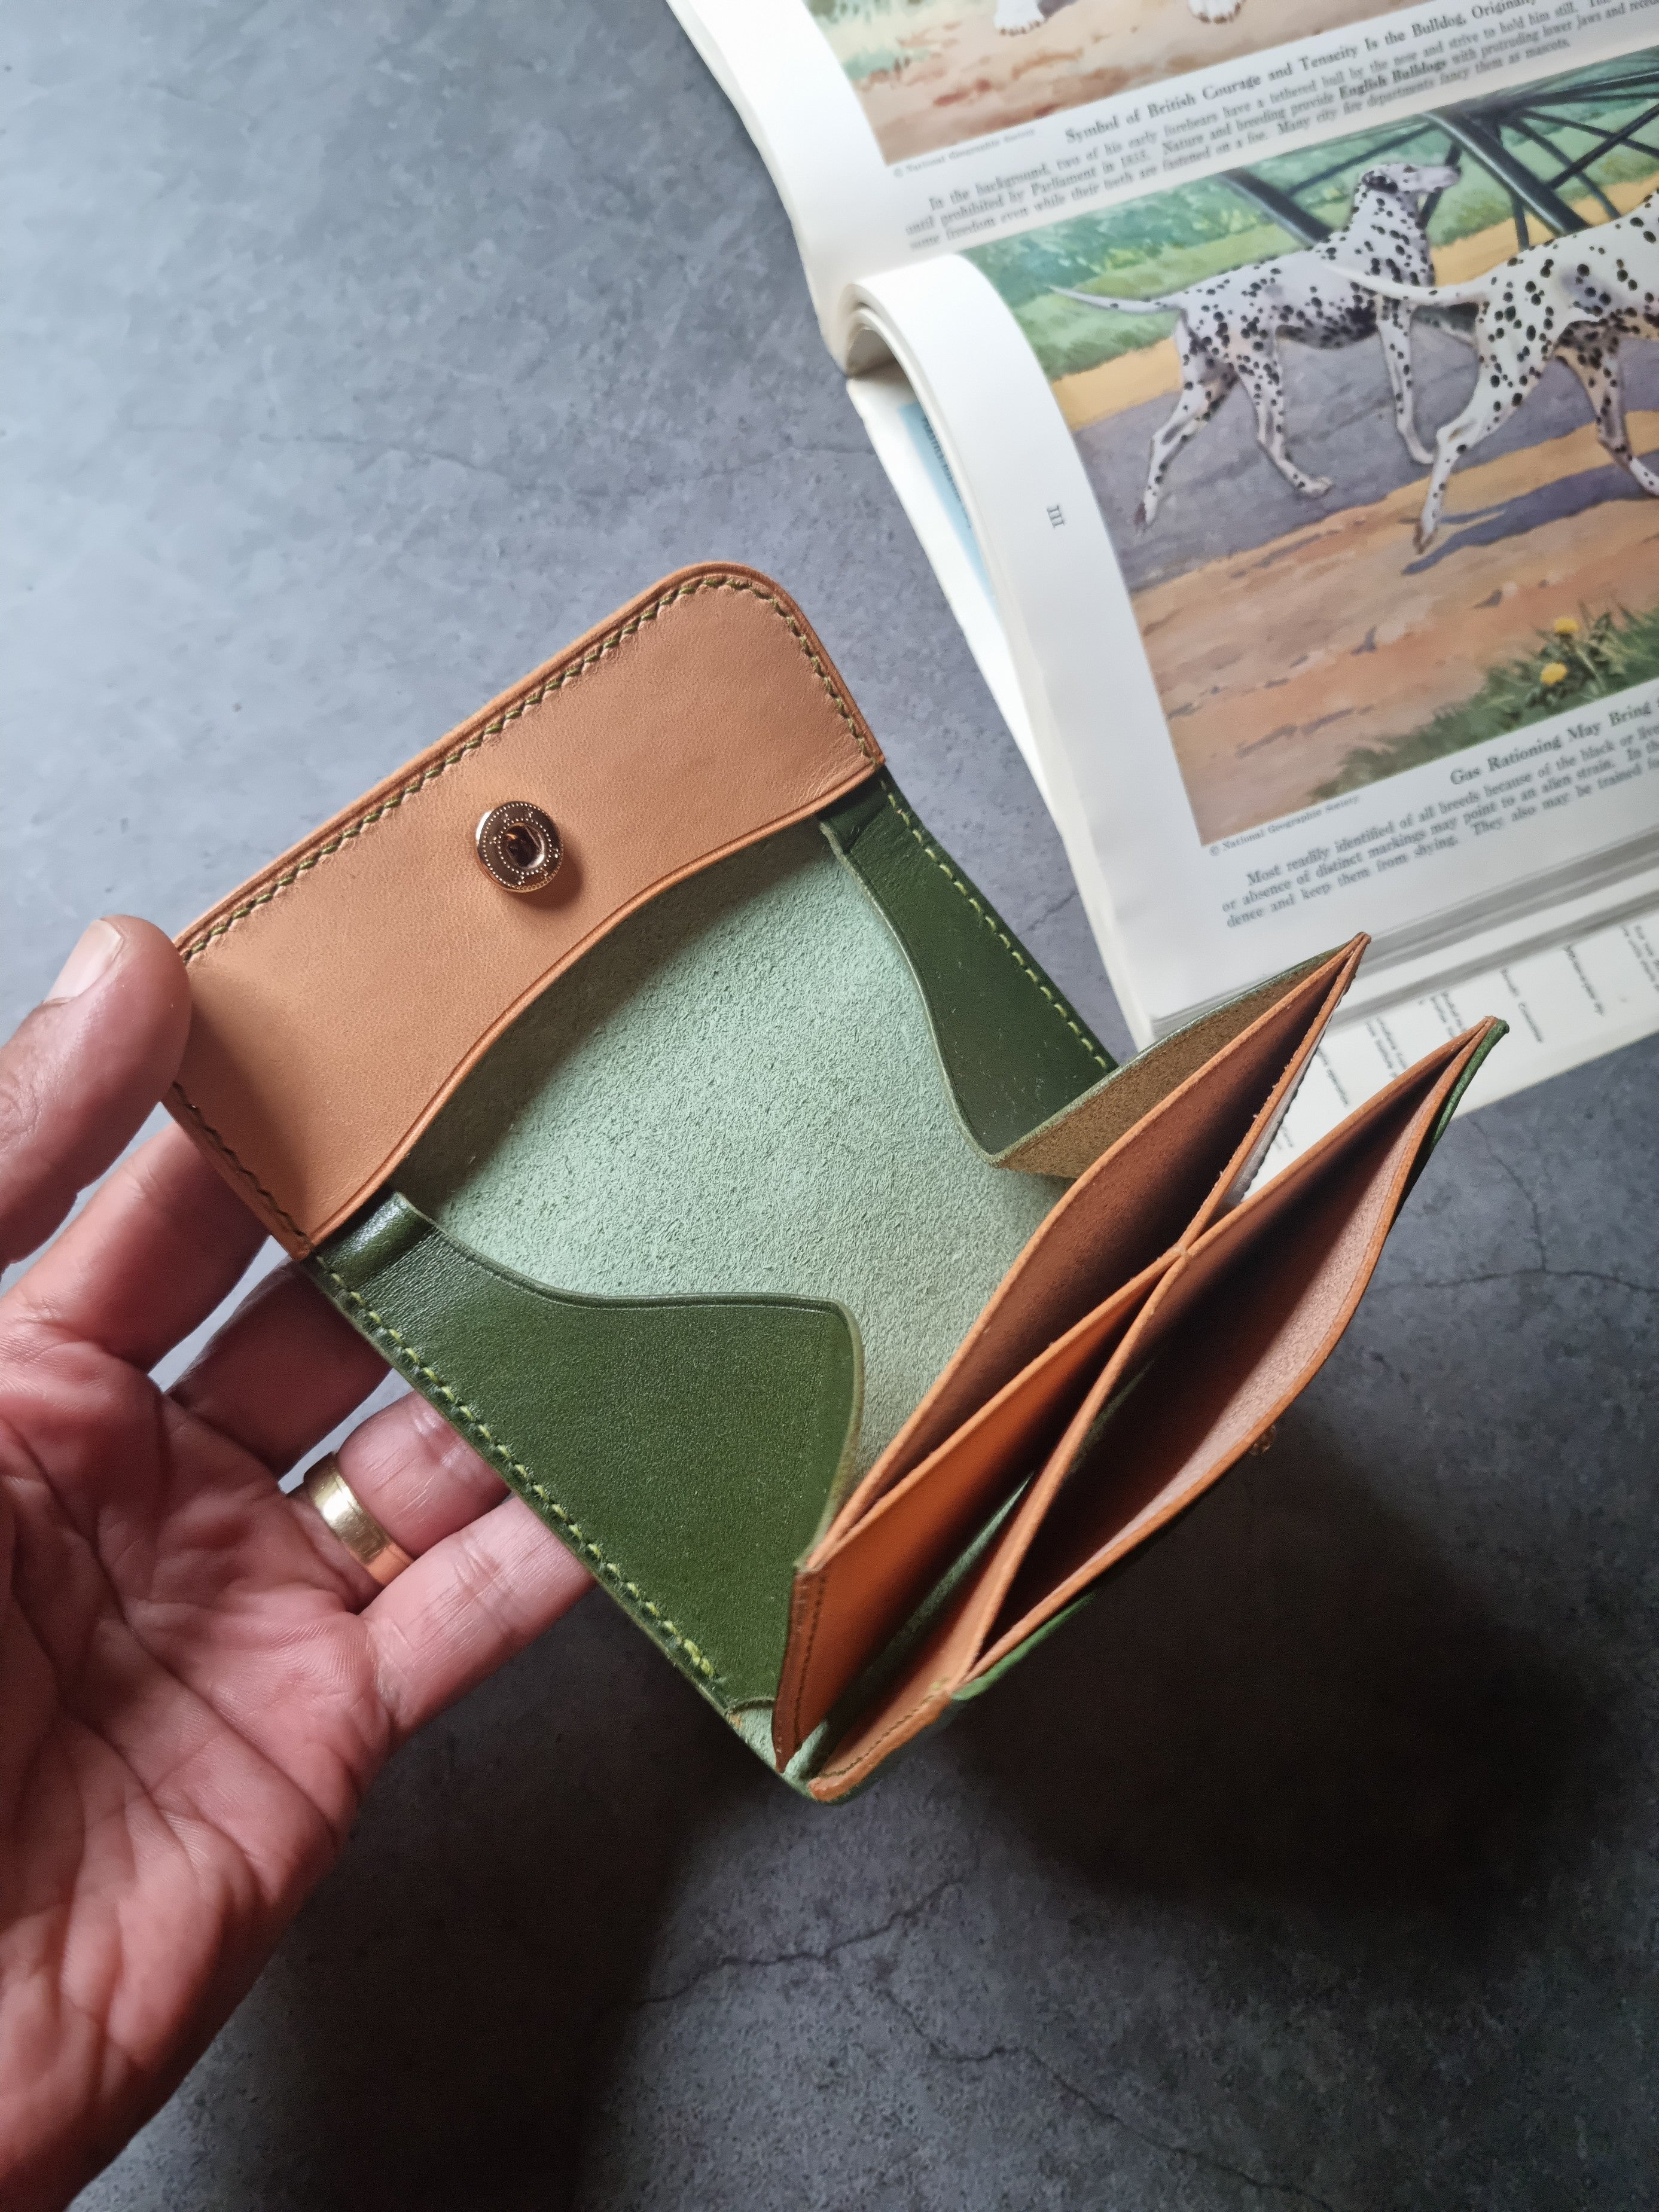 Folded Leather Purse - Random Acts of Kindness